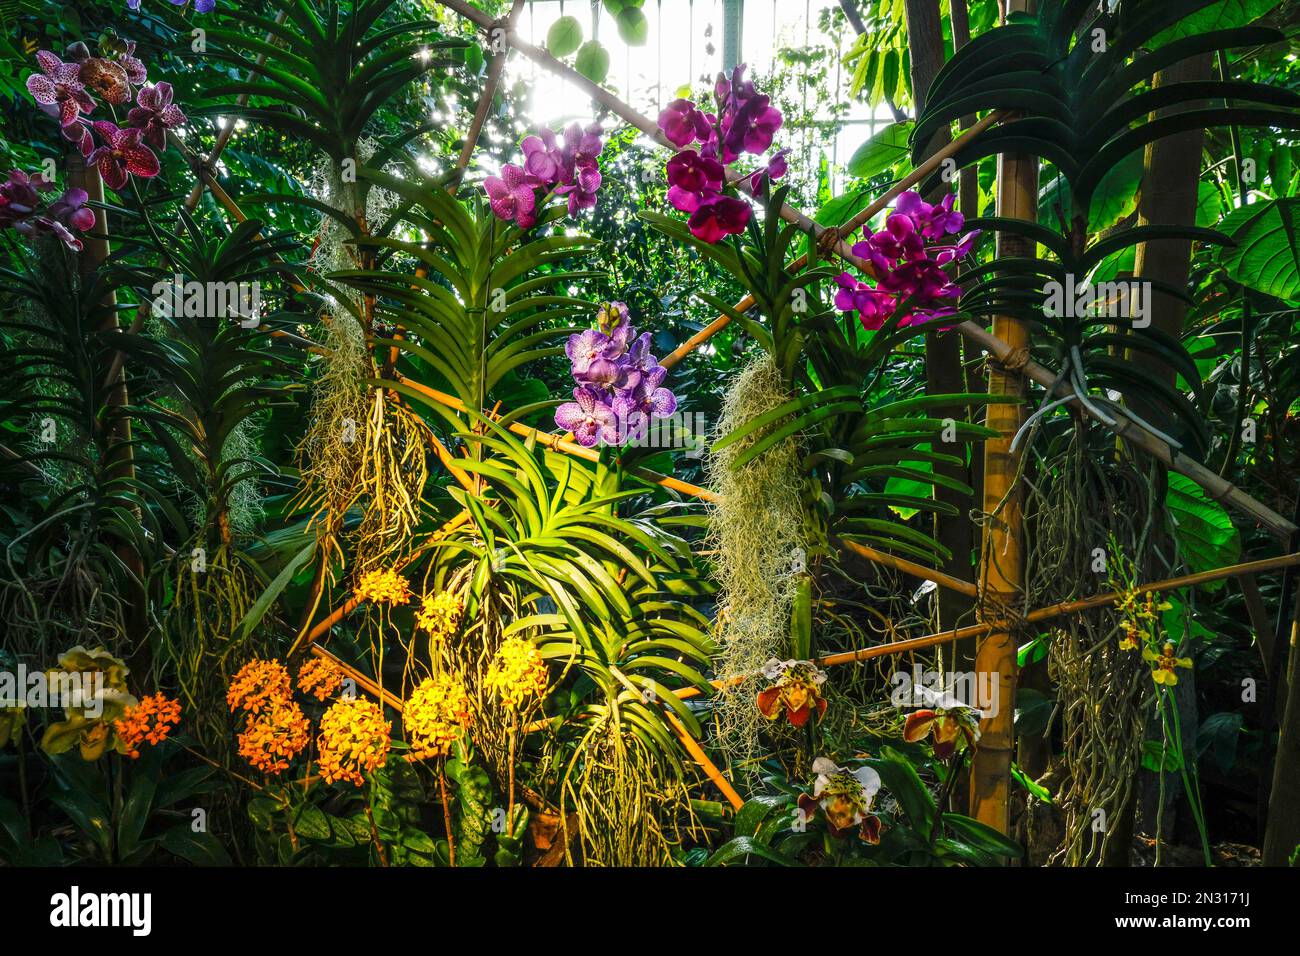 A THOUSAND AND ONE ORCHIDS EXHIBITION IN THE GREAT GREENHOUSES OF THE JARDIN DES PLANTES IN PARIS Stock Photo